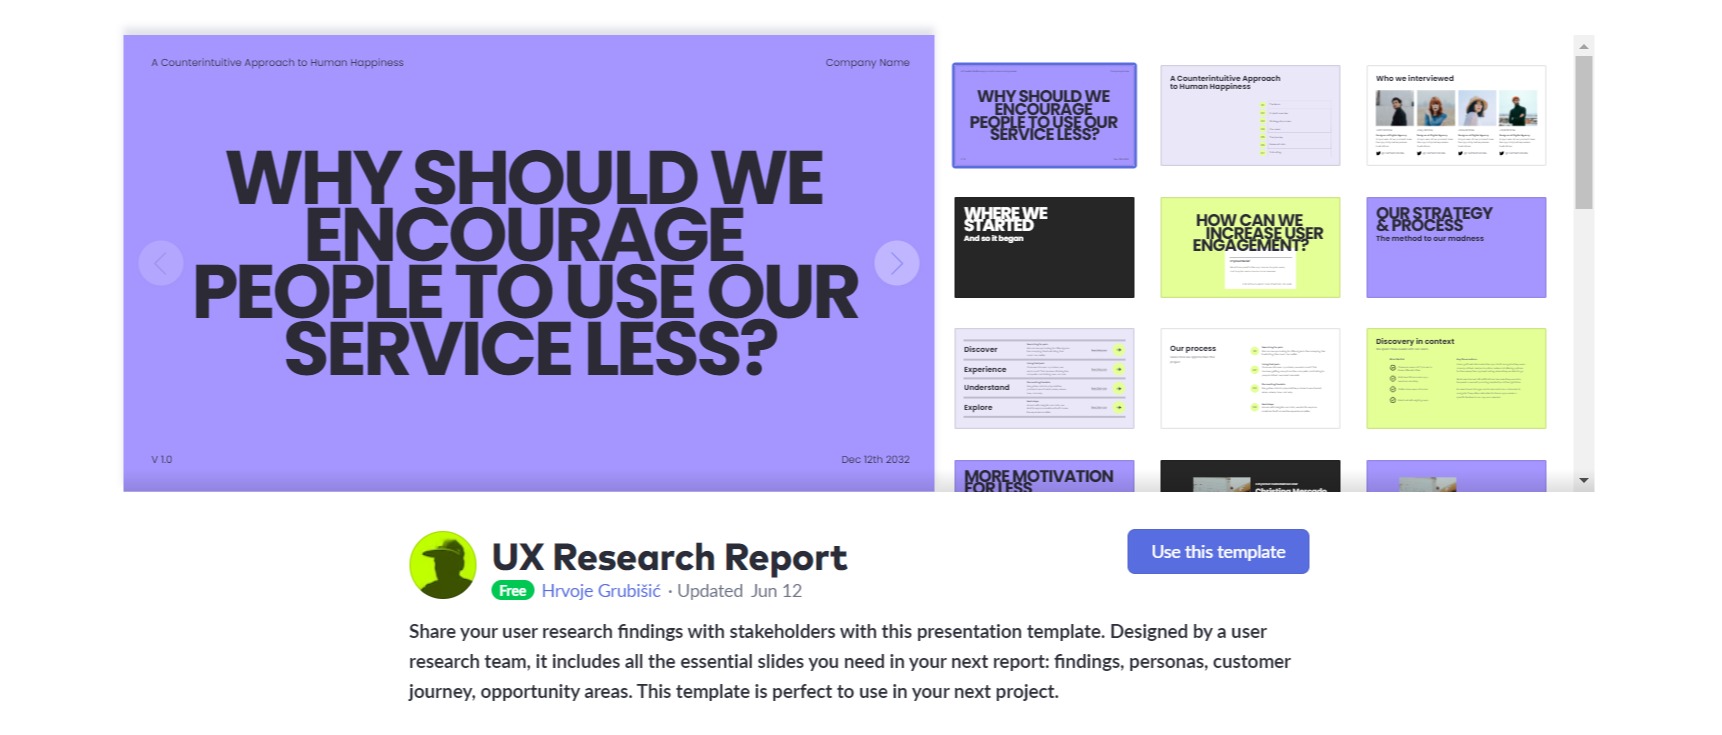 ux research report template